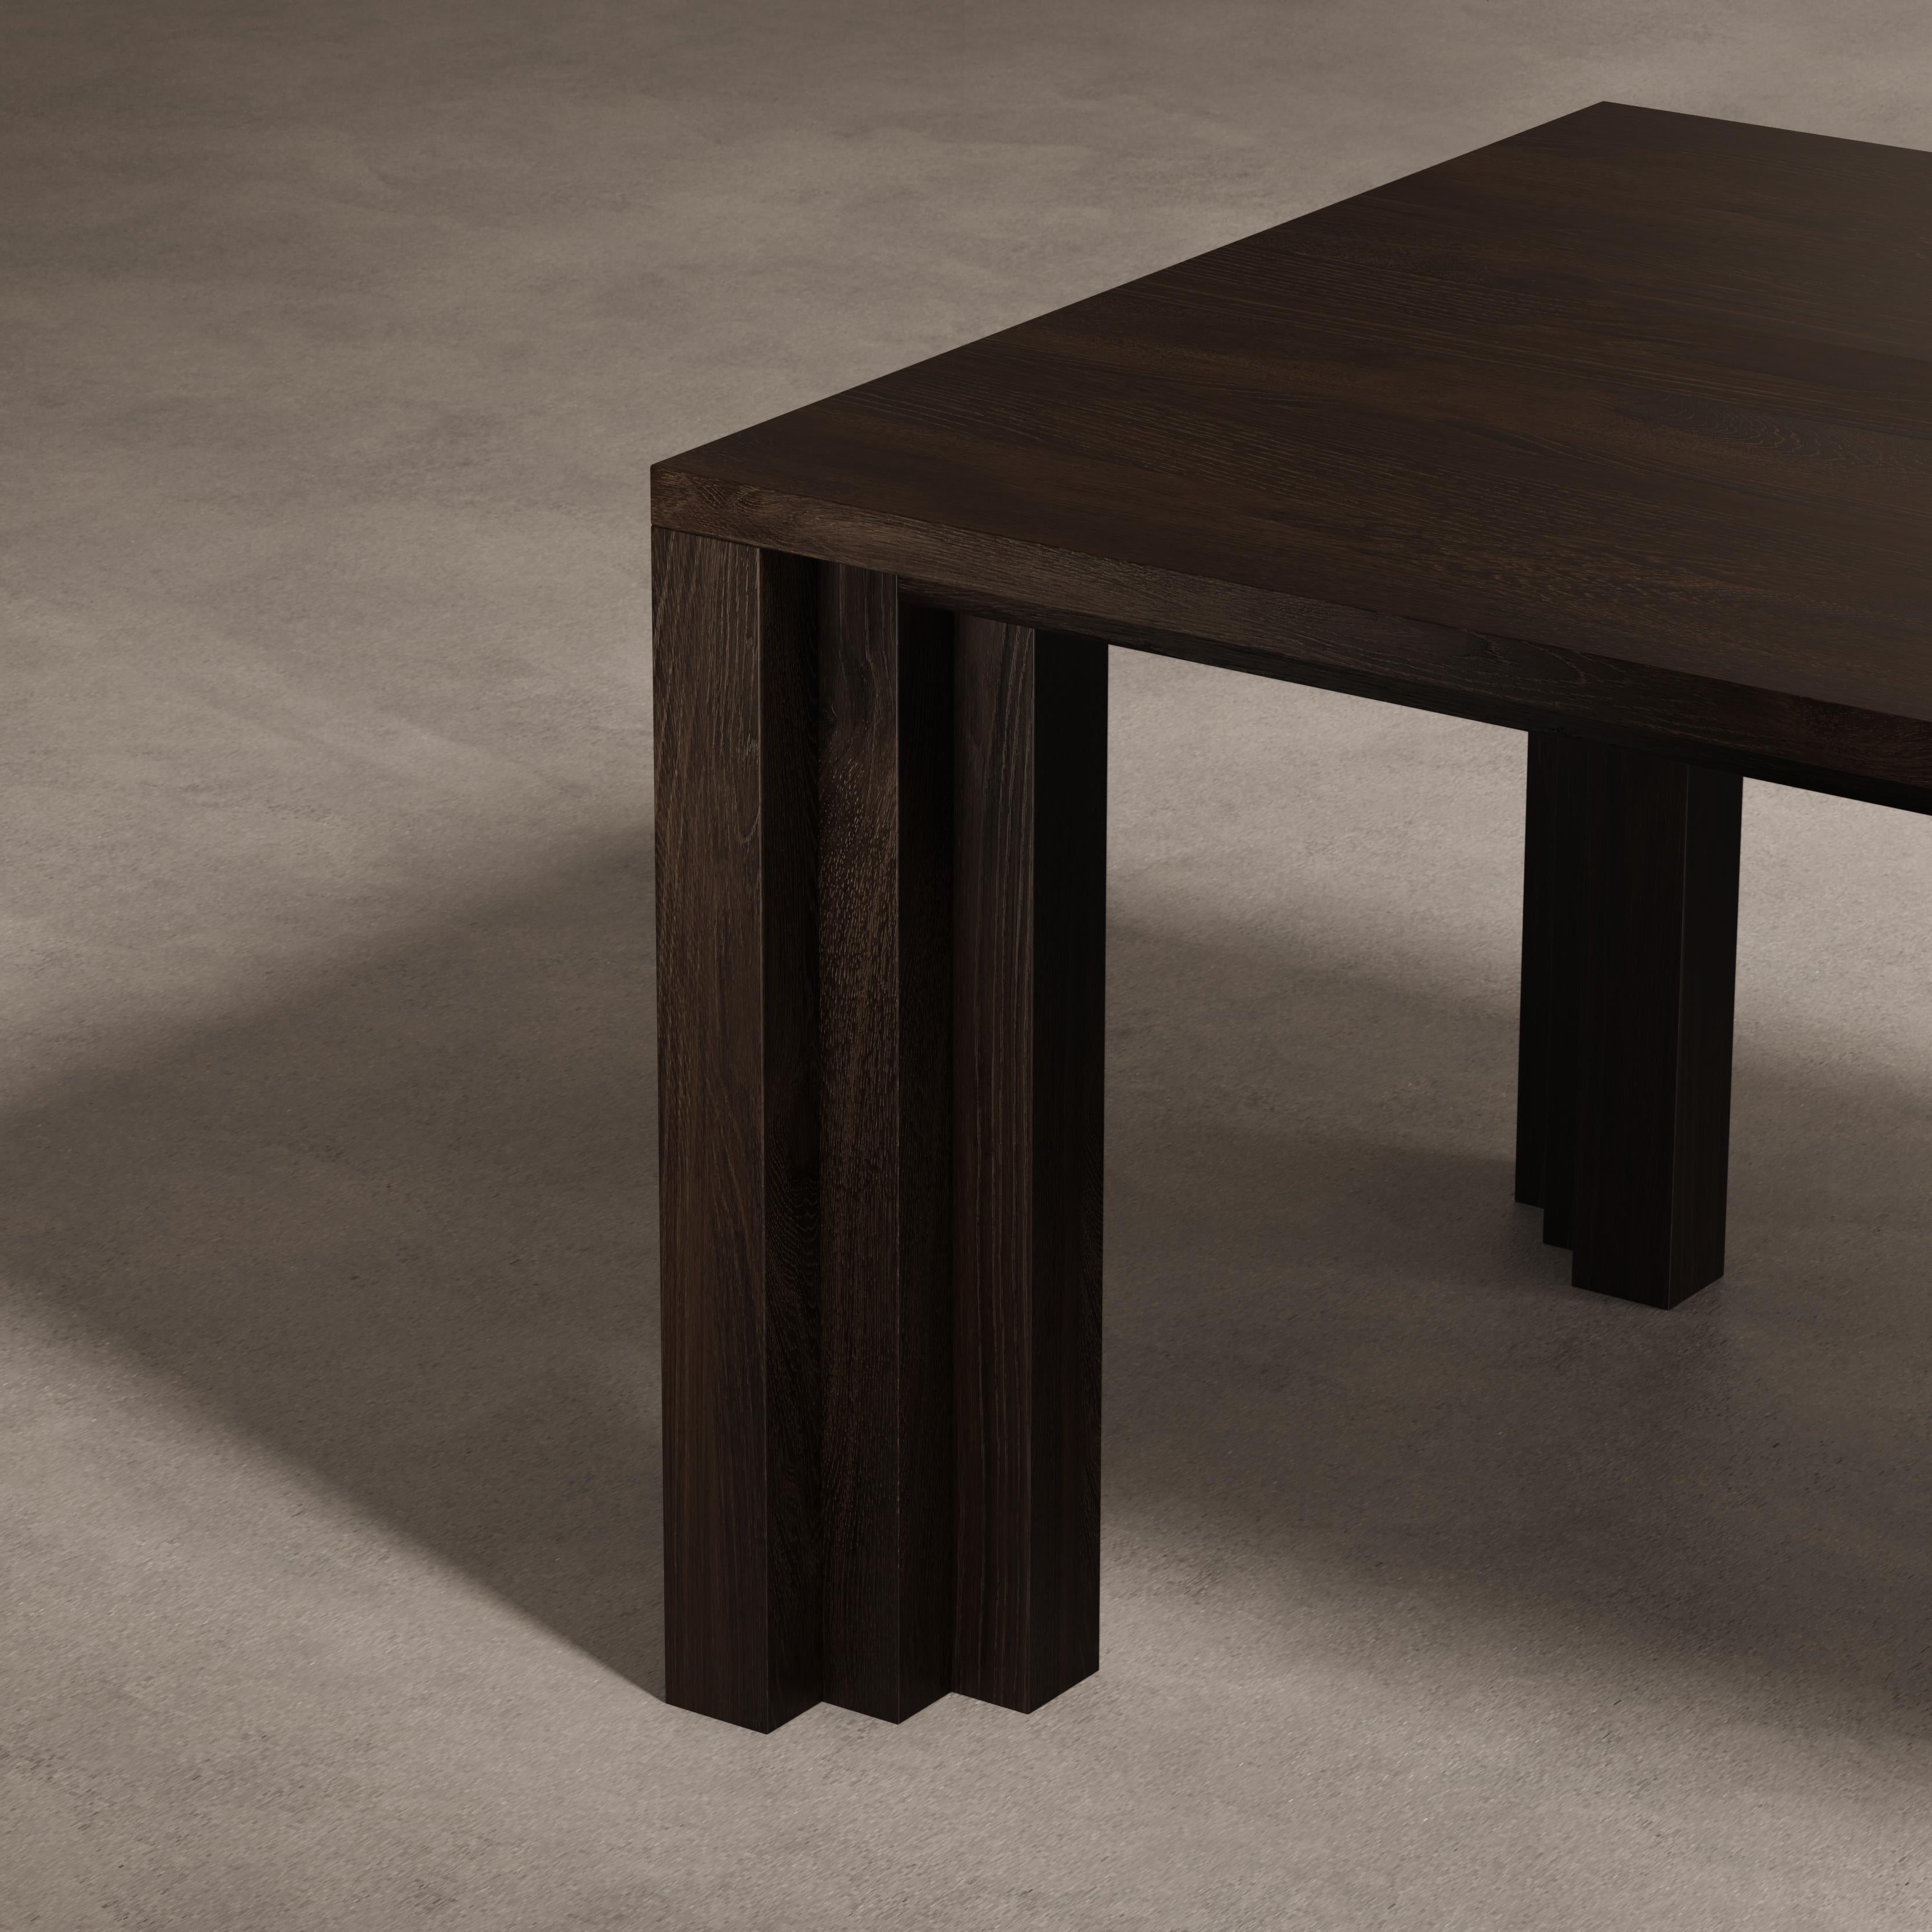 The Cadence Table, features a flow of volumes and shade lines in a sequence that is rhythmic and exciting. Its repetitive forms deepen the meaning of the home's altar that is the table. The table is made from solid hardwood and designed by Aad